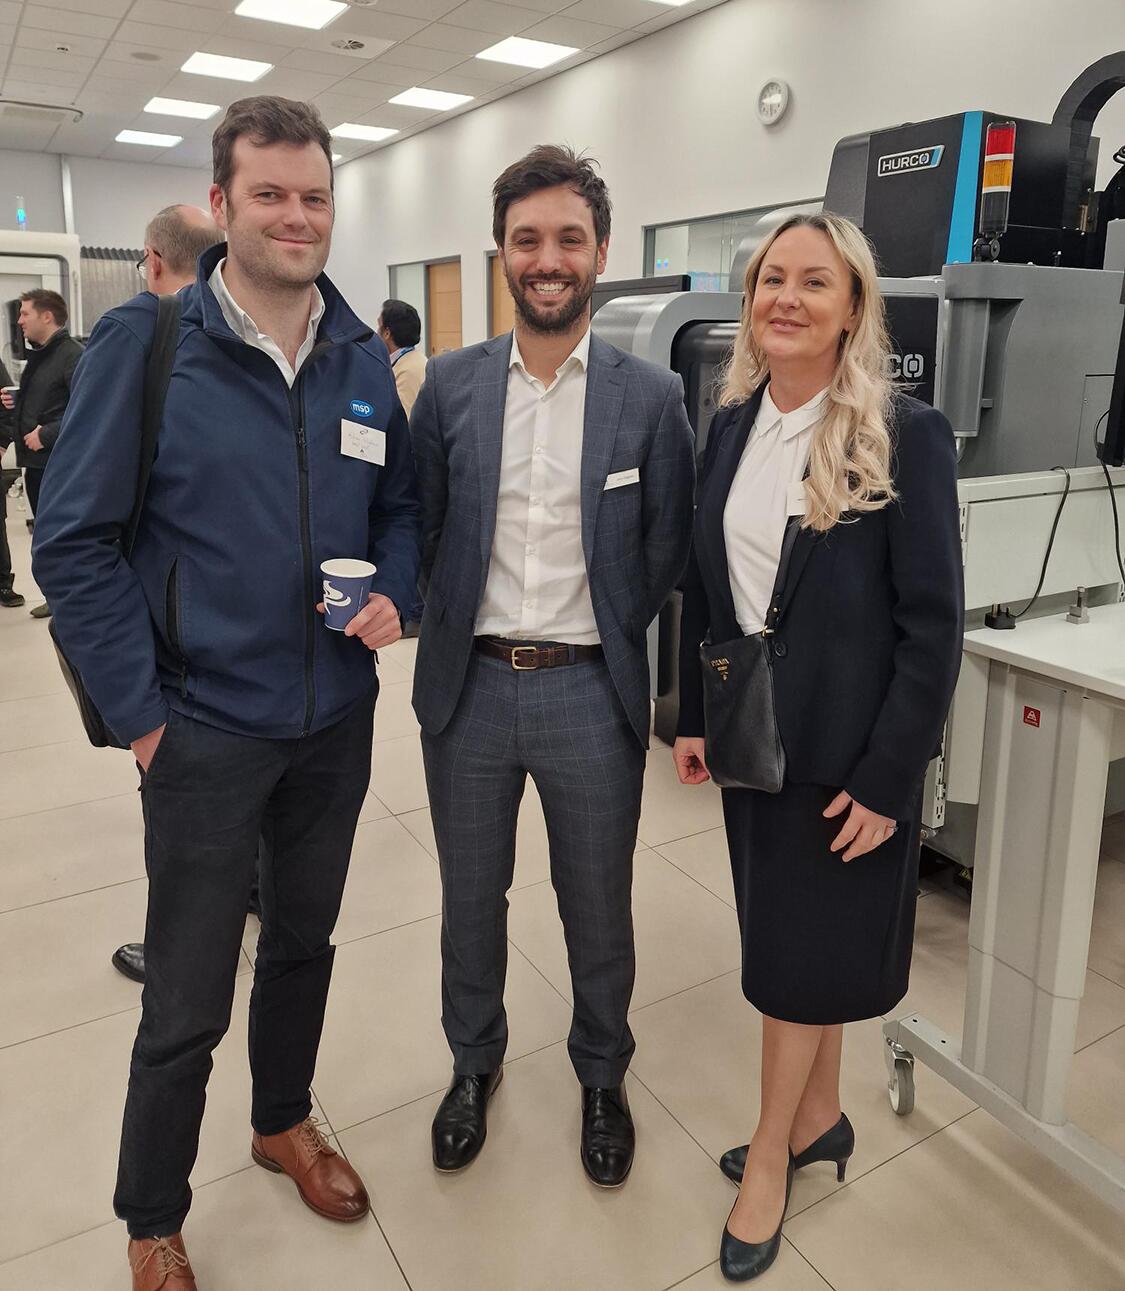 This month, Margaret and Aidan went to their first AMUK members forum. Pictured here with Joshua Dugdale of AMUK (centre).